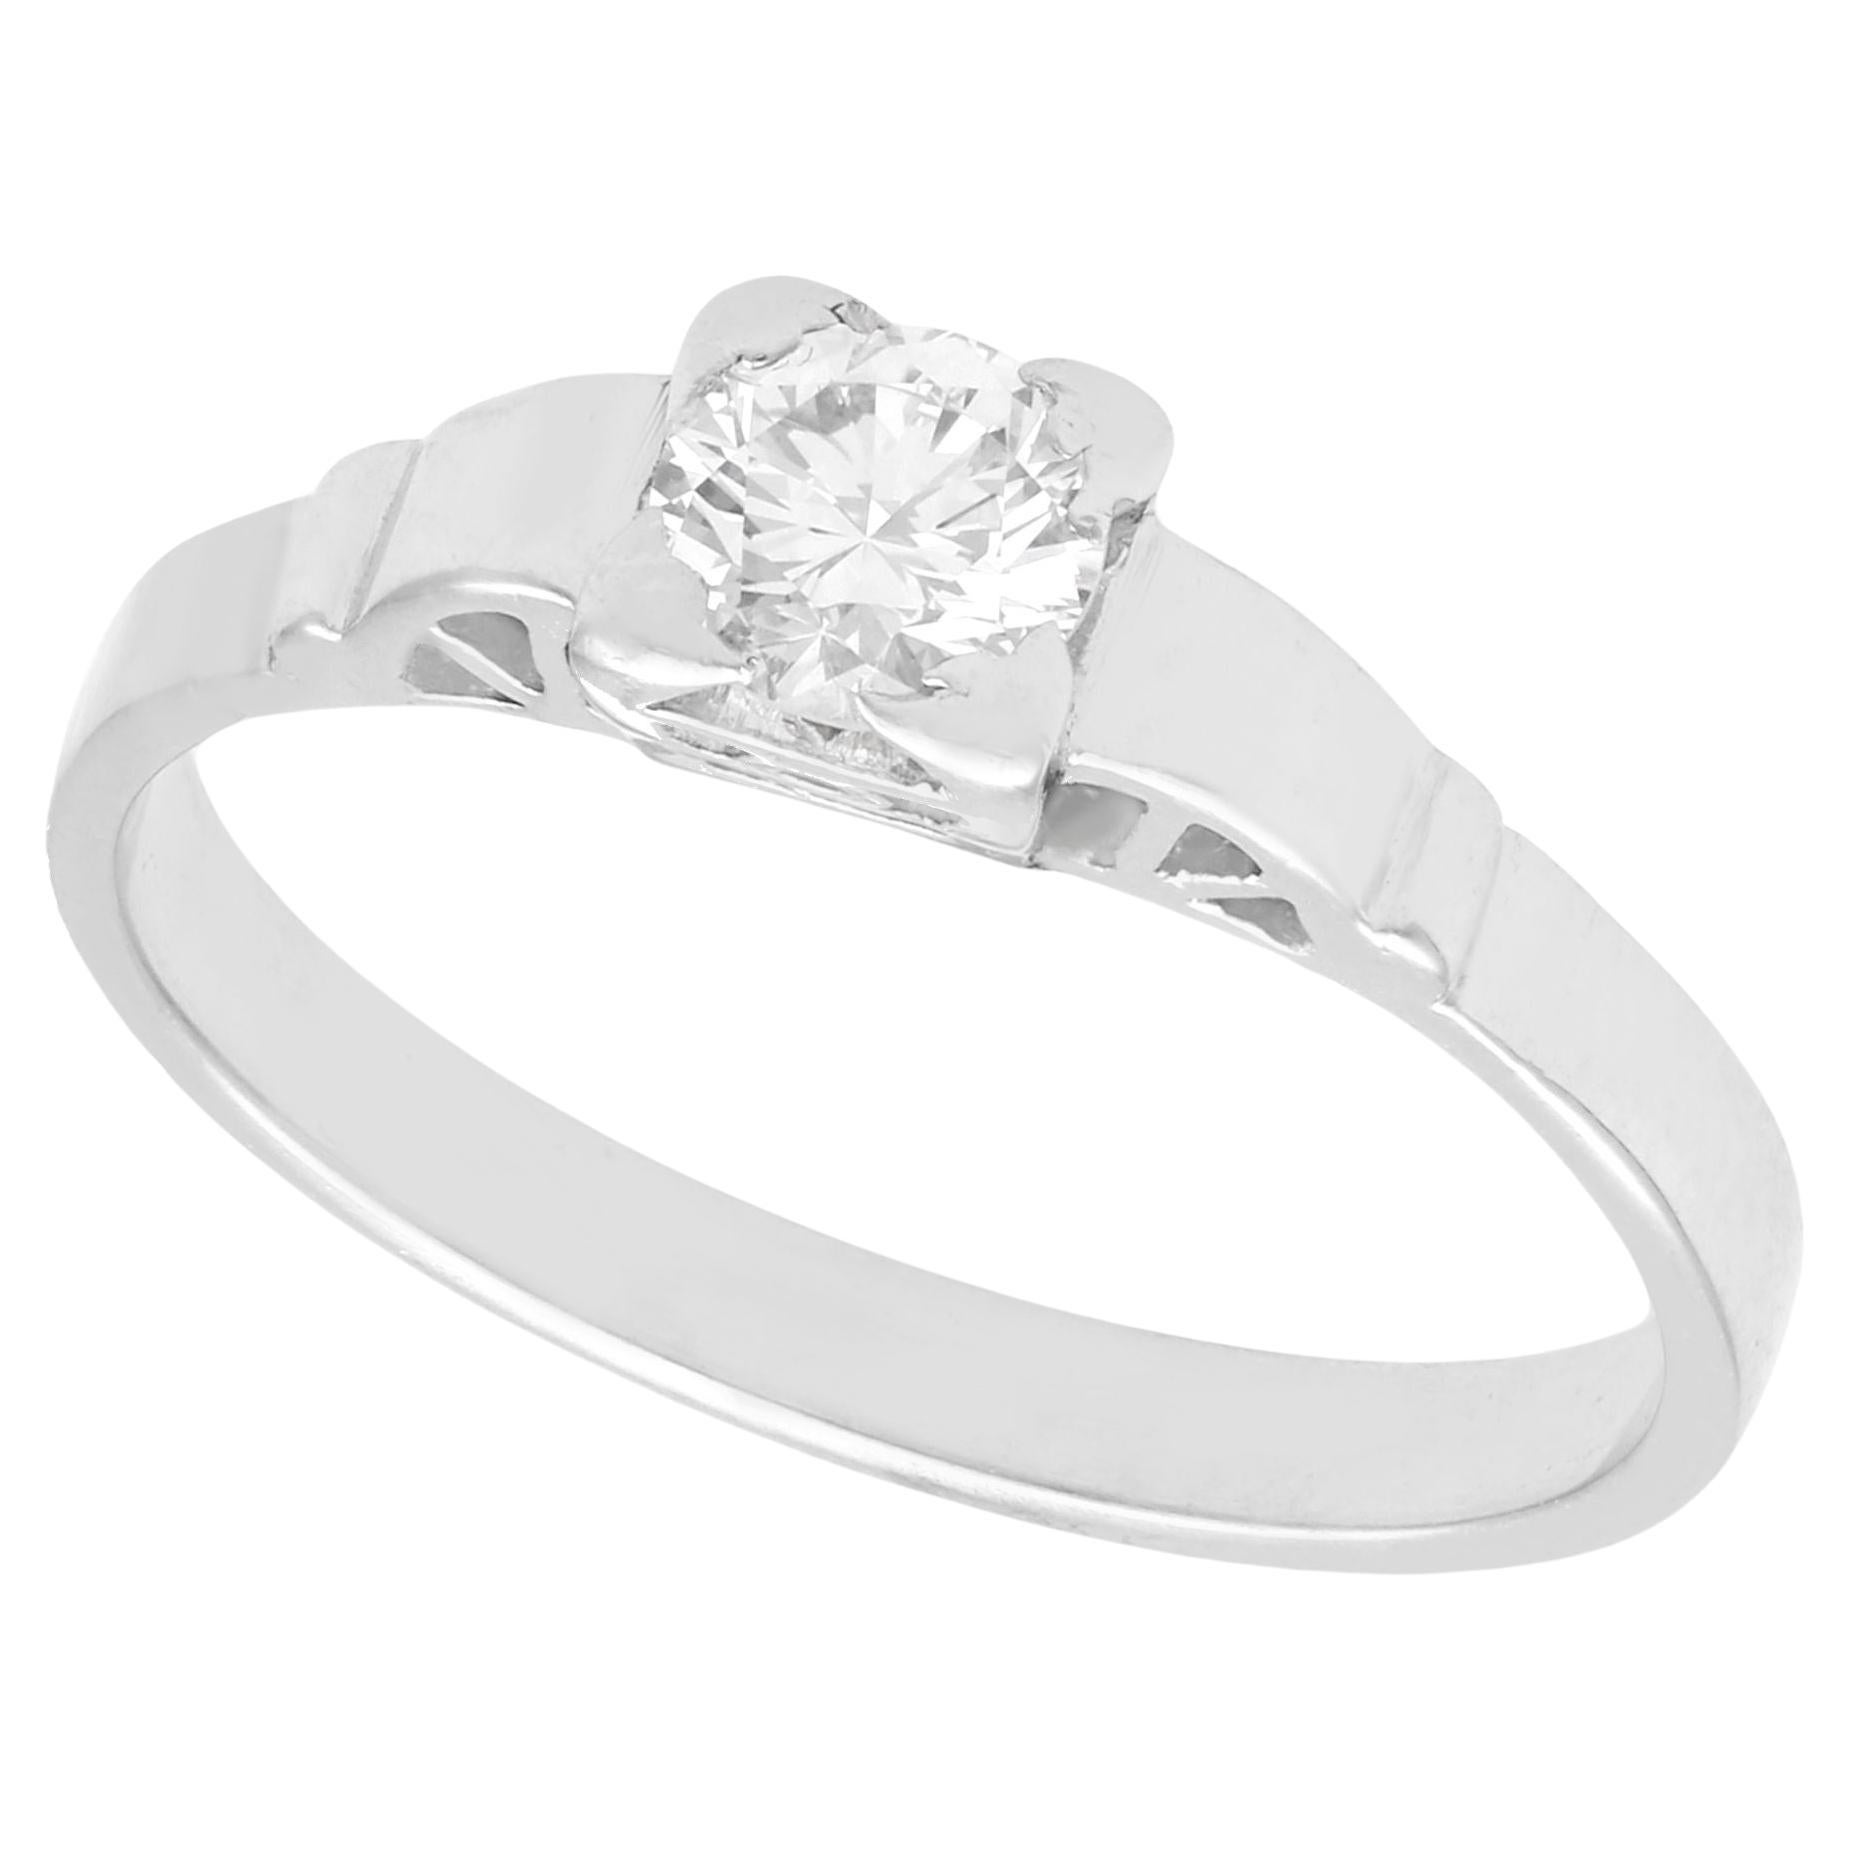 Vintage 1940s Diamond White Gold Solitaire Engagement Ring For Sale